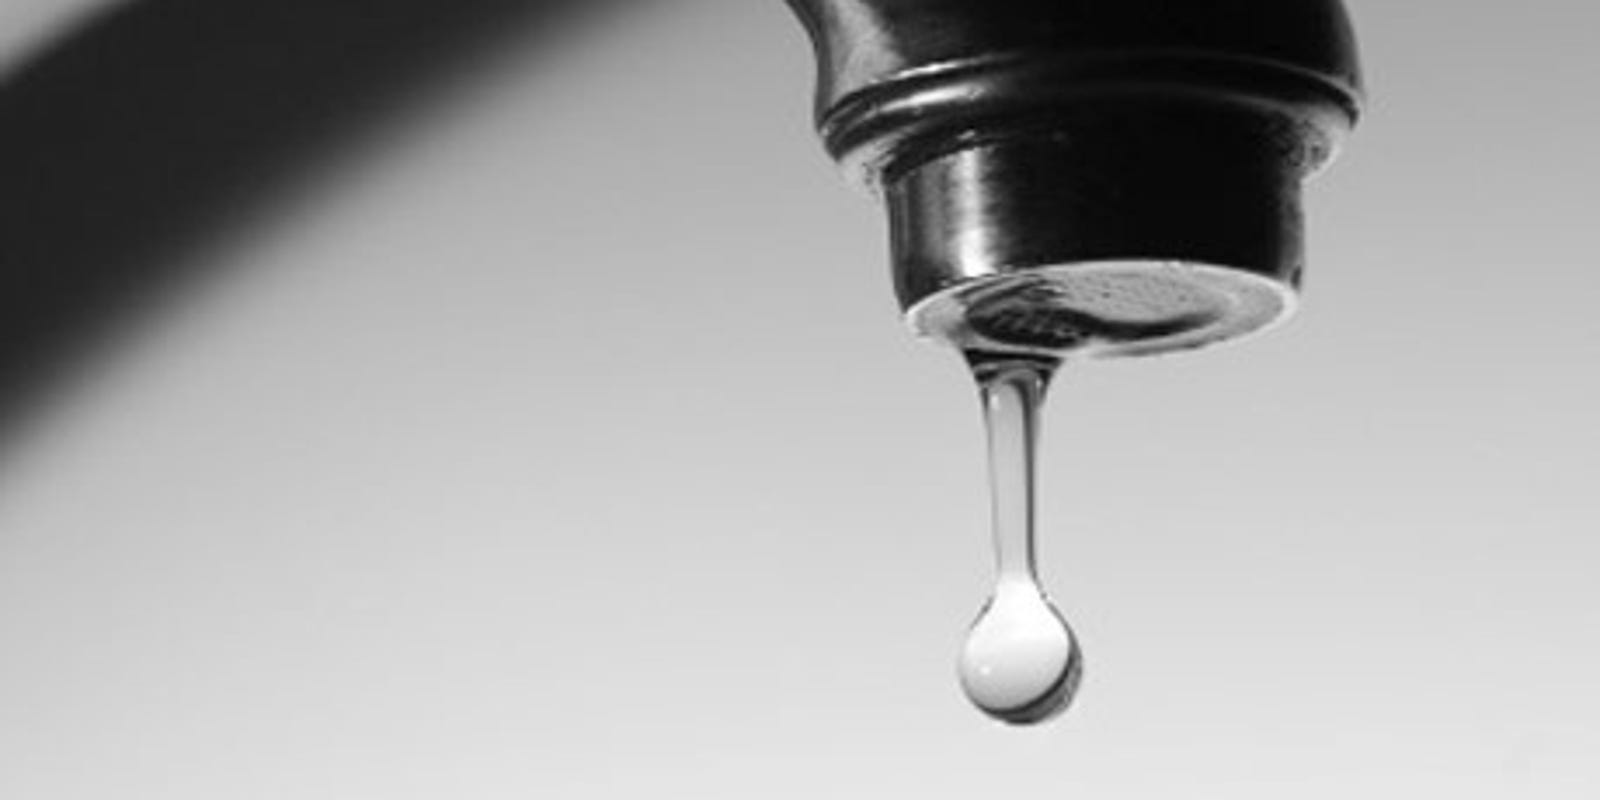 Asheville Tap Water Discoloration And Reimbursement For Losses And